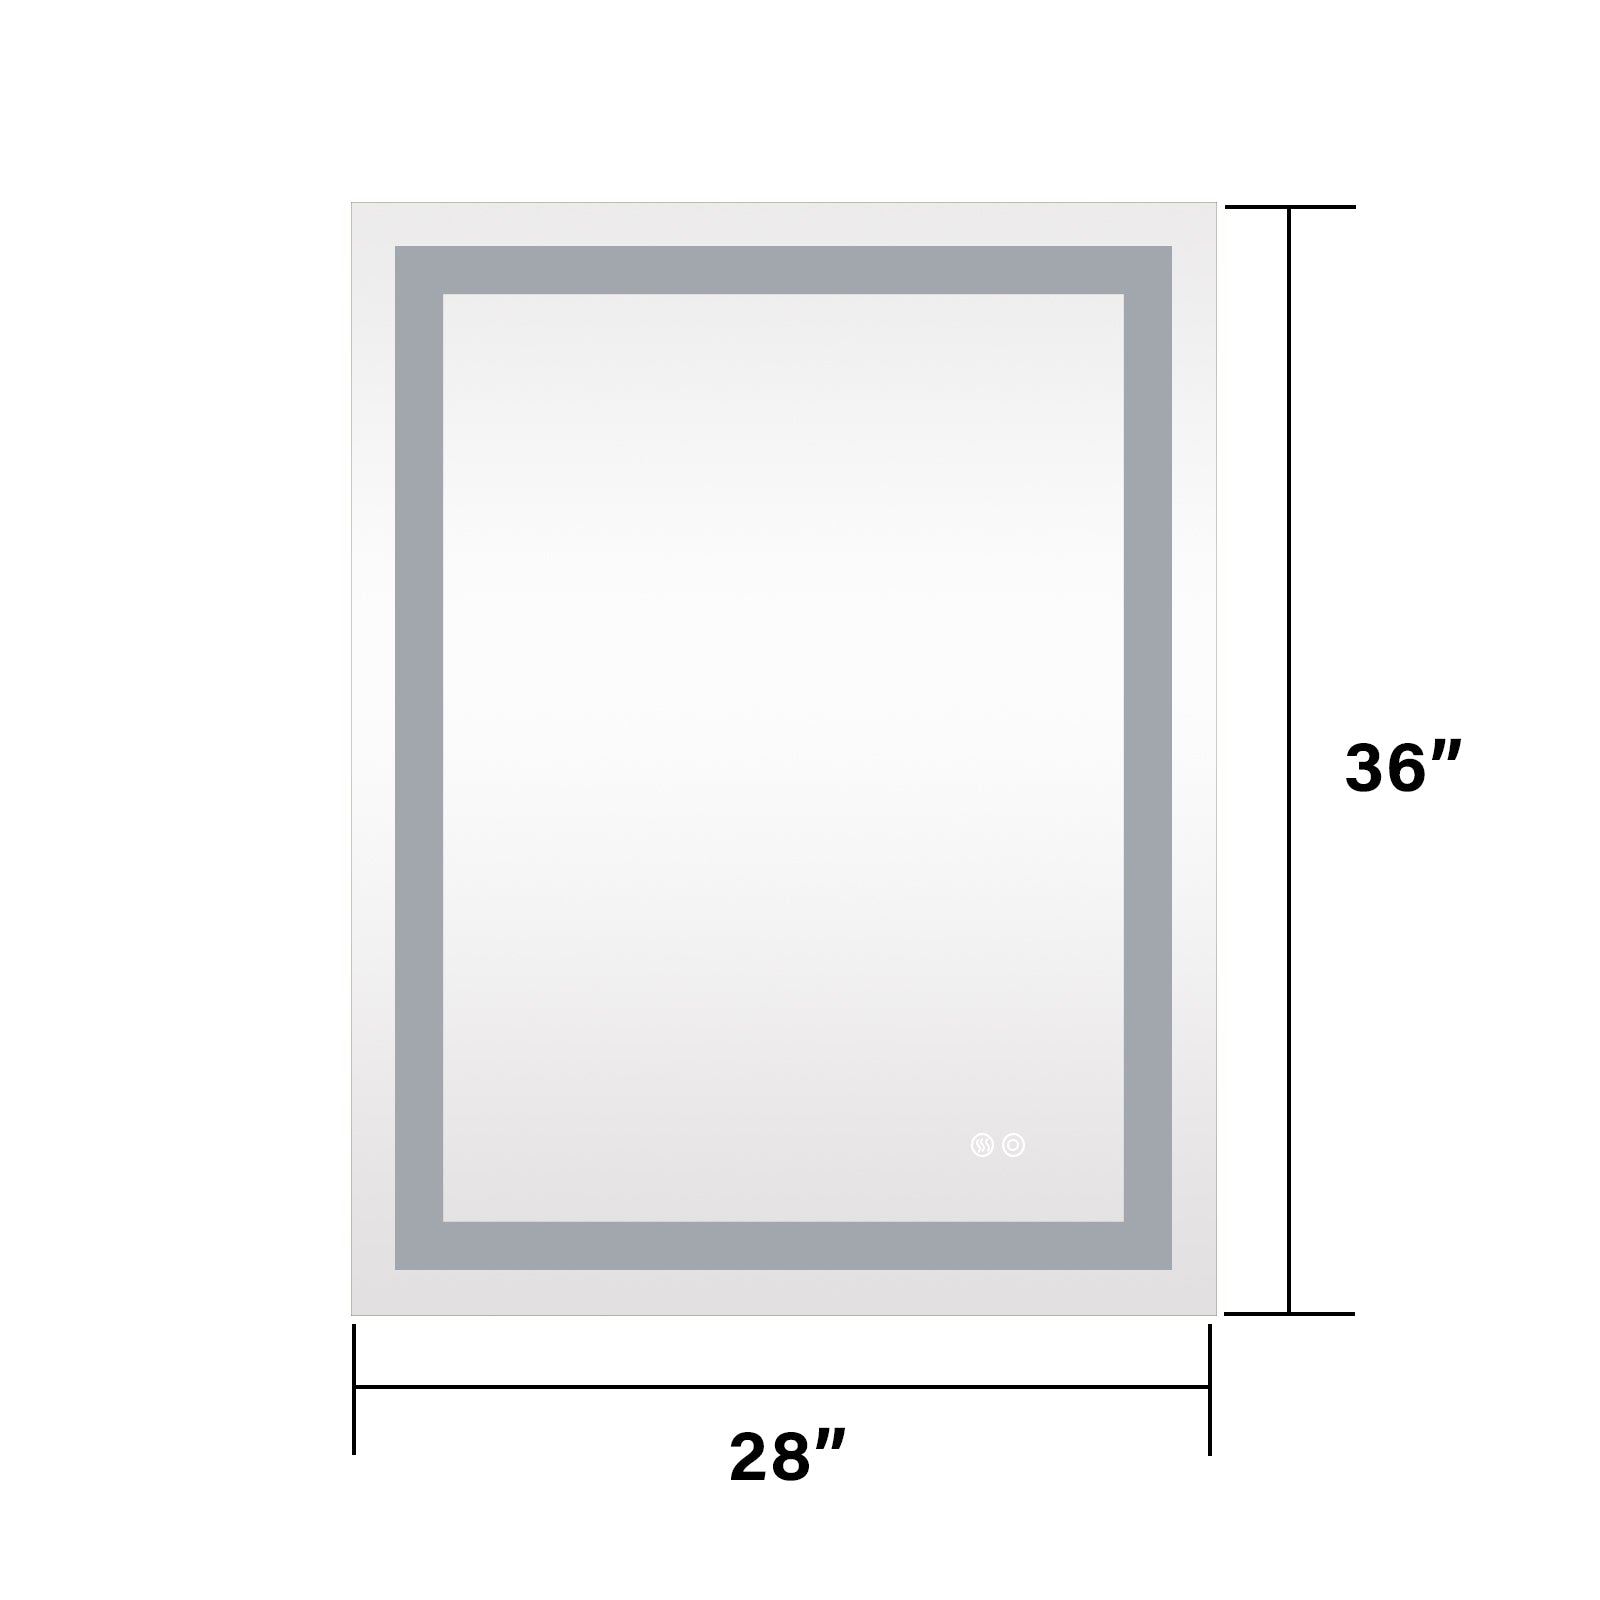 ZNTS 28x36 Inch LED Lighted Bathroom Mirror with 3 Colors Light, Wall Mounted Bathroom Vanity Mirror with W156267688